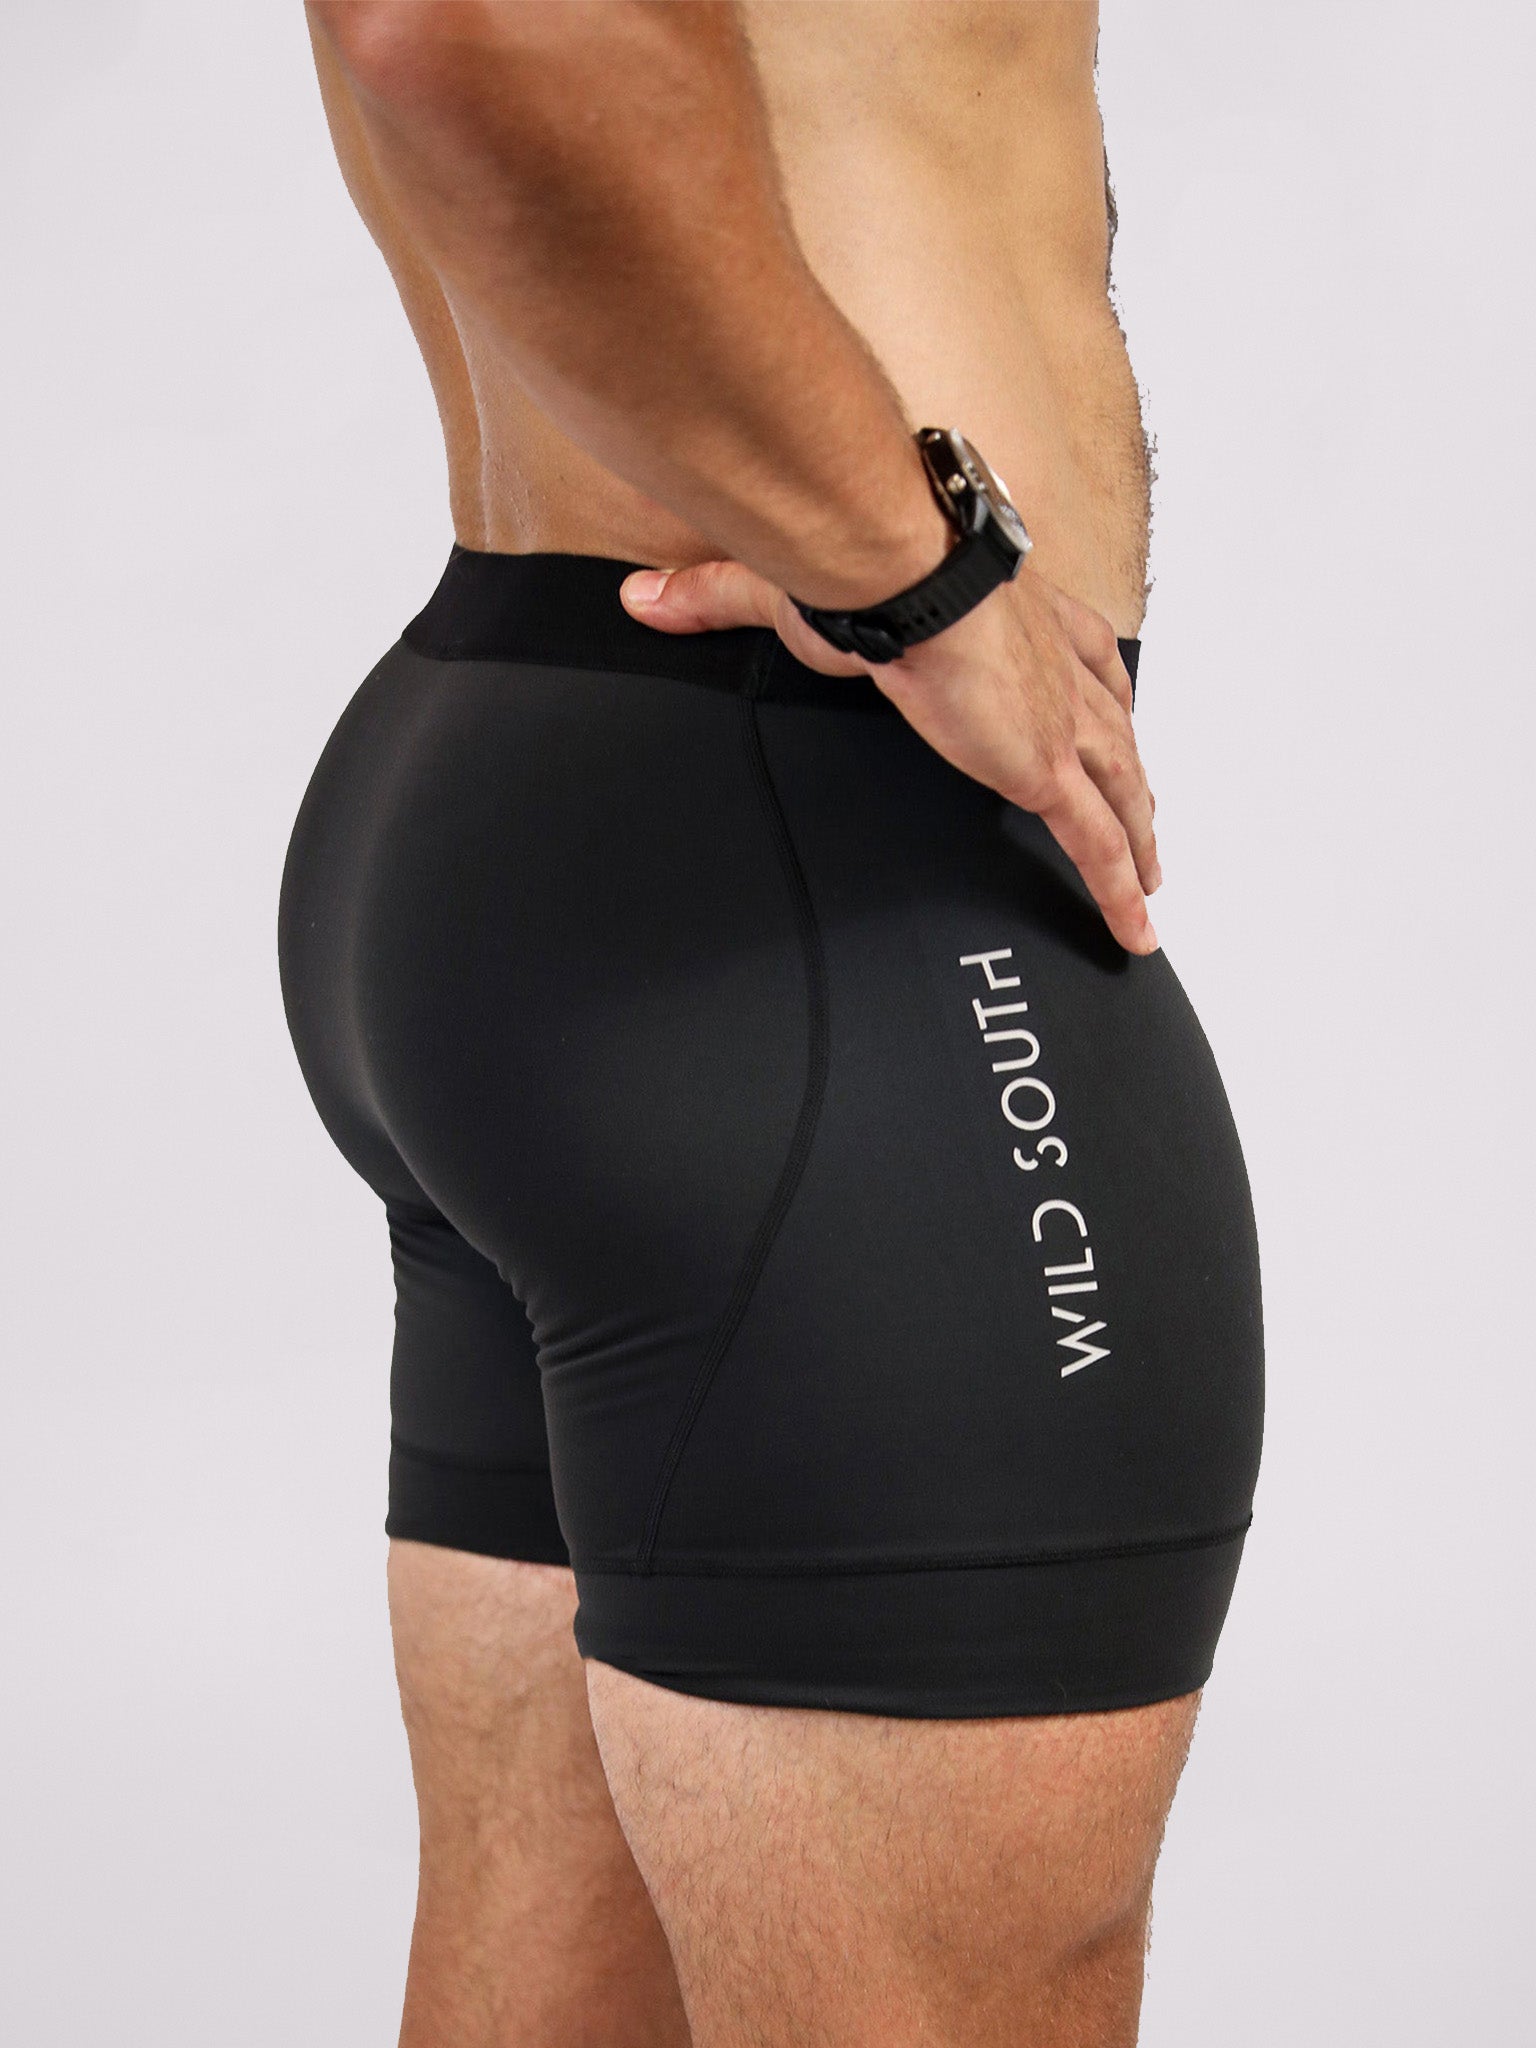 Compression shorts for men and women l